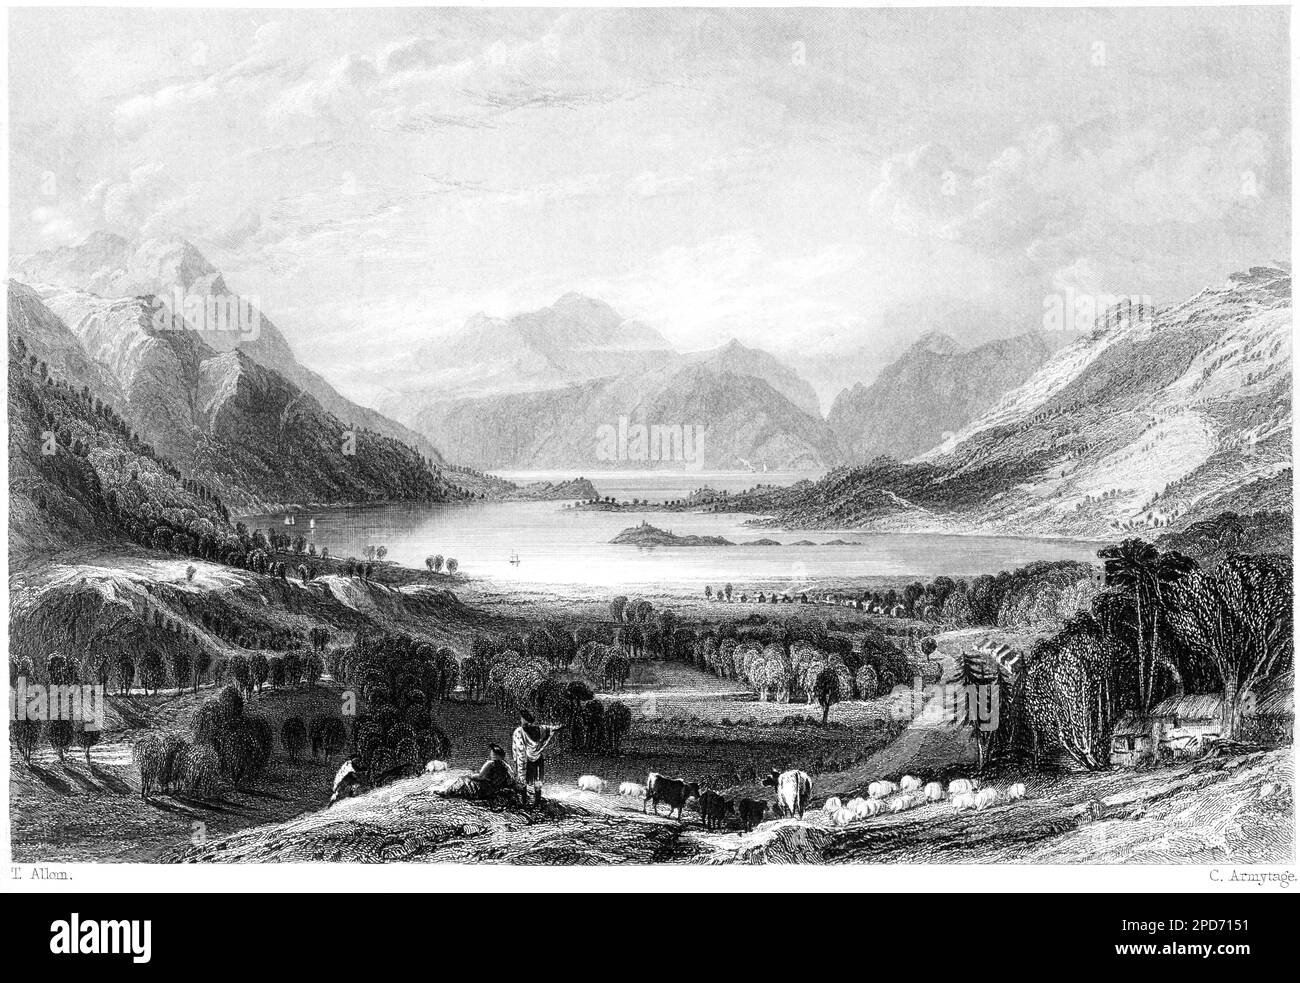 An engraving of Loch Leven looking towards Ballahuish (Ballachulish) Ferry, Argyllshire, Scotland UK scanned at high res from a book printed in 1840. Stock Photo